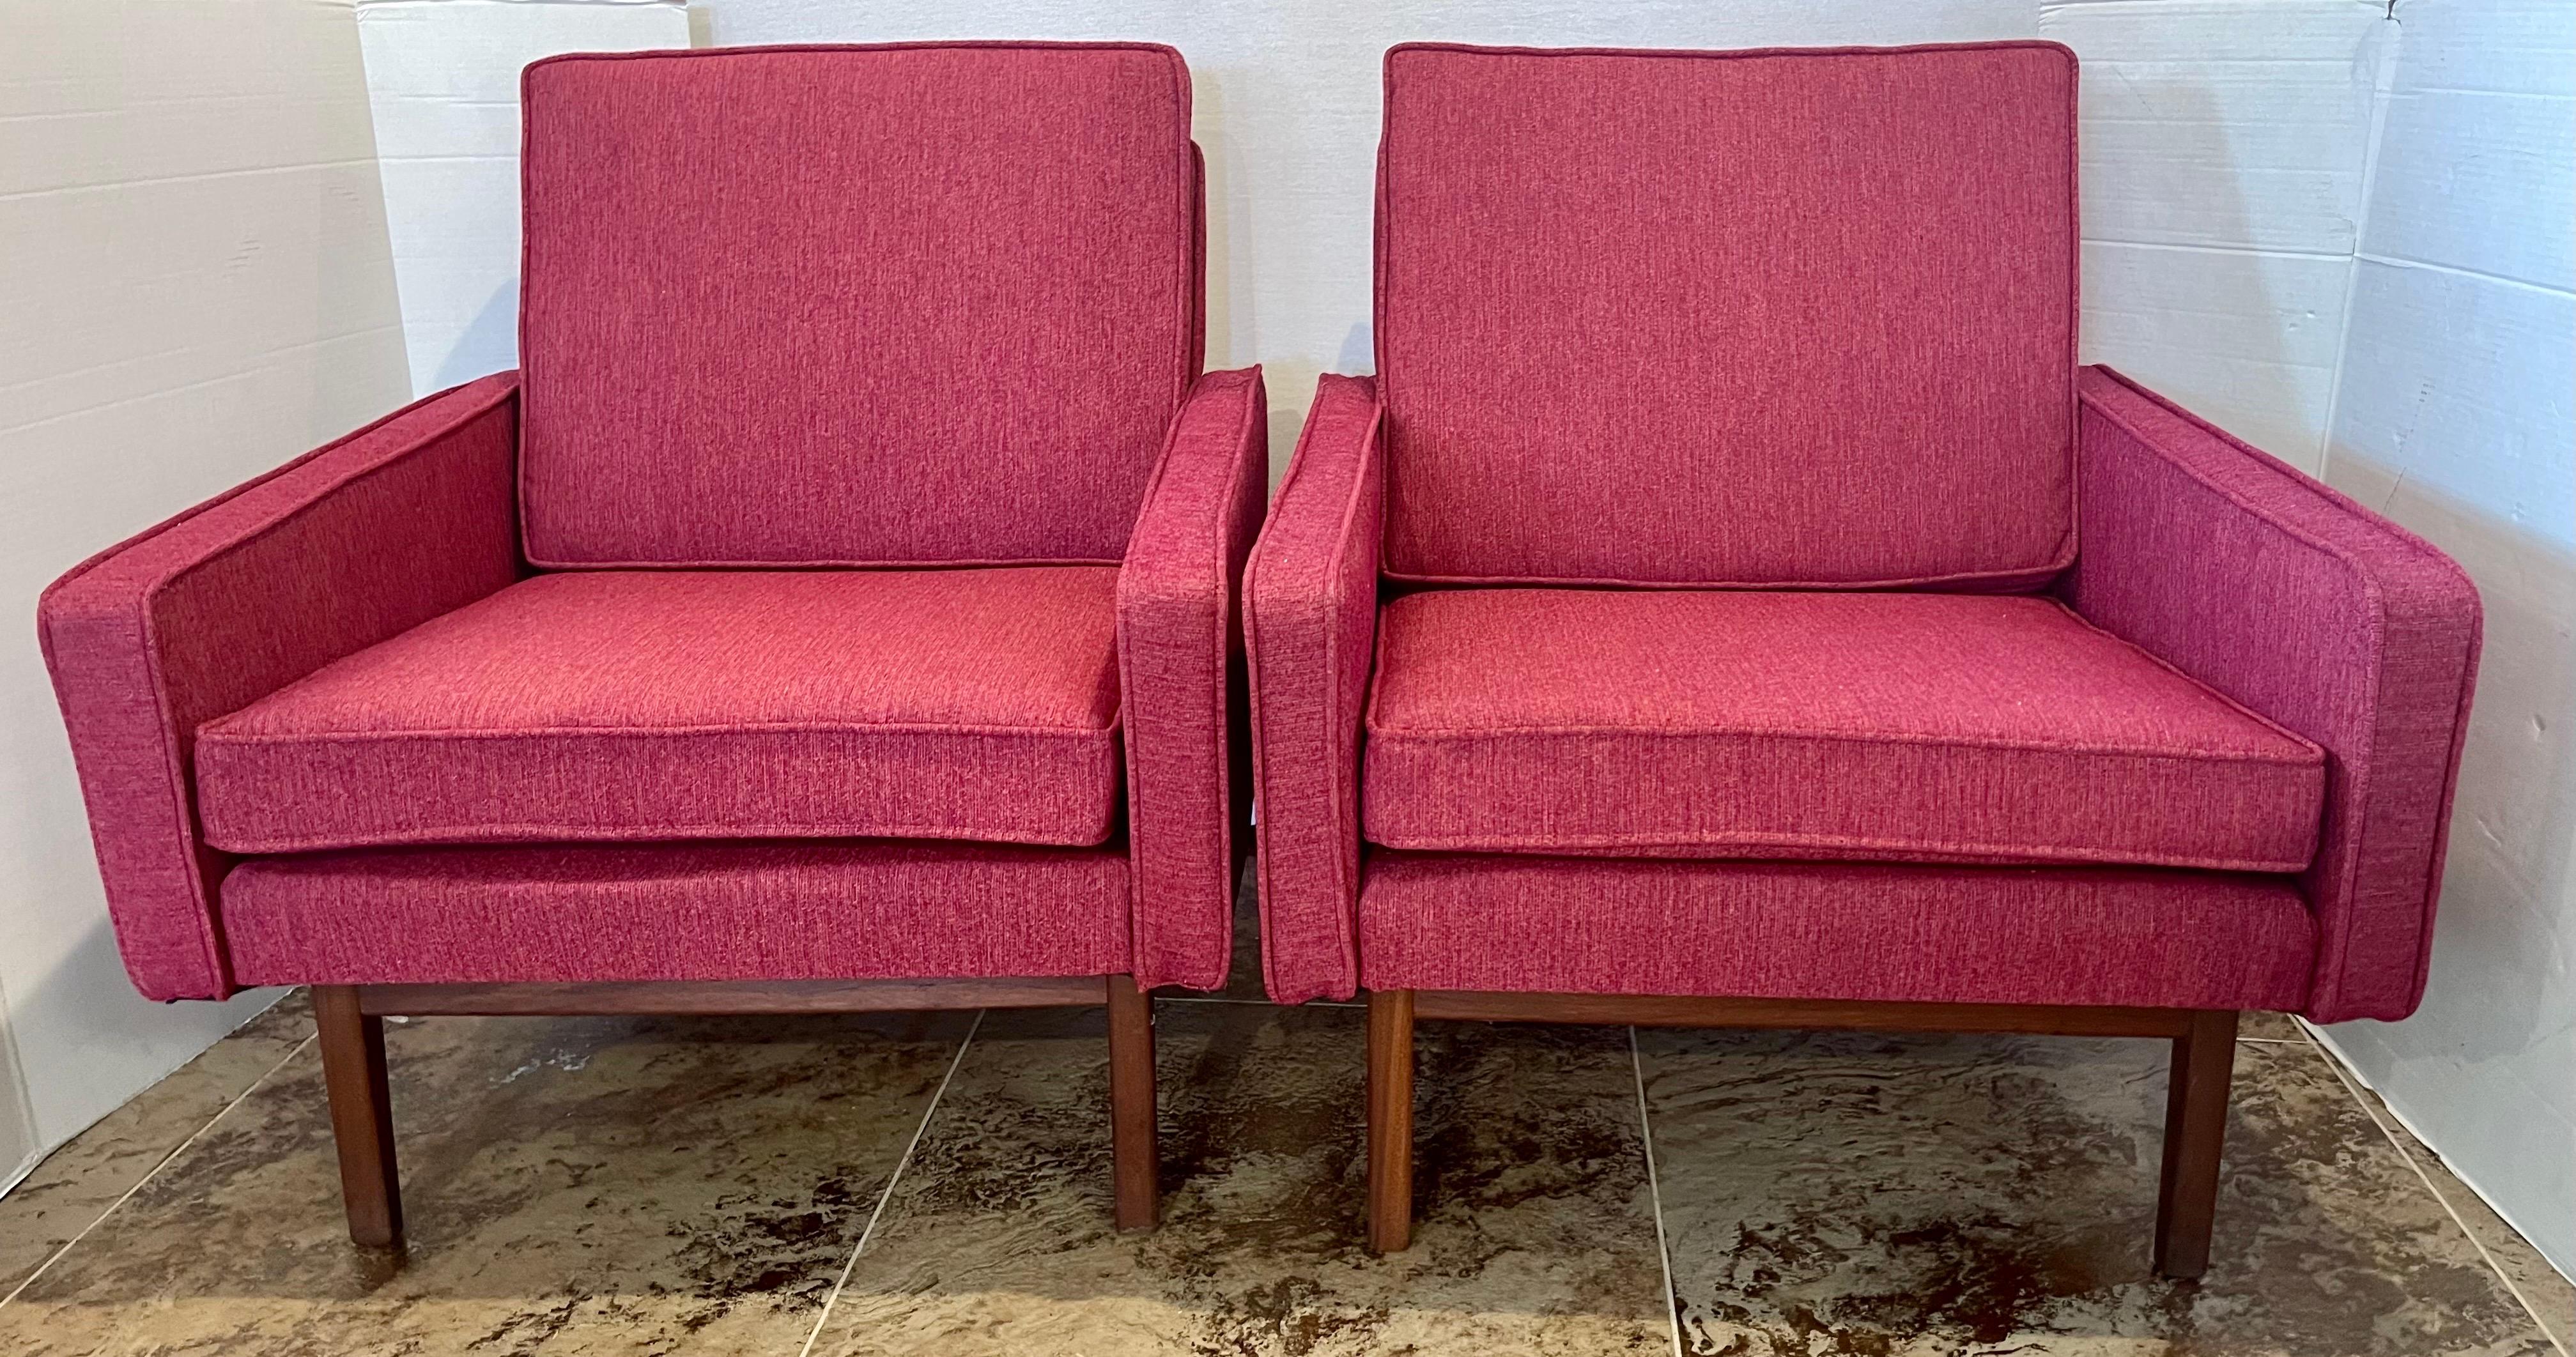 Magnificent pair of matching Jack Cartwright lounge chairs that have just been reupholstered by our team. The reupholstery includes new fill. The fabric is a subtle raspberry colored cotton blend material that really makes this set pop.
All